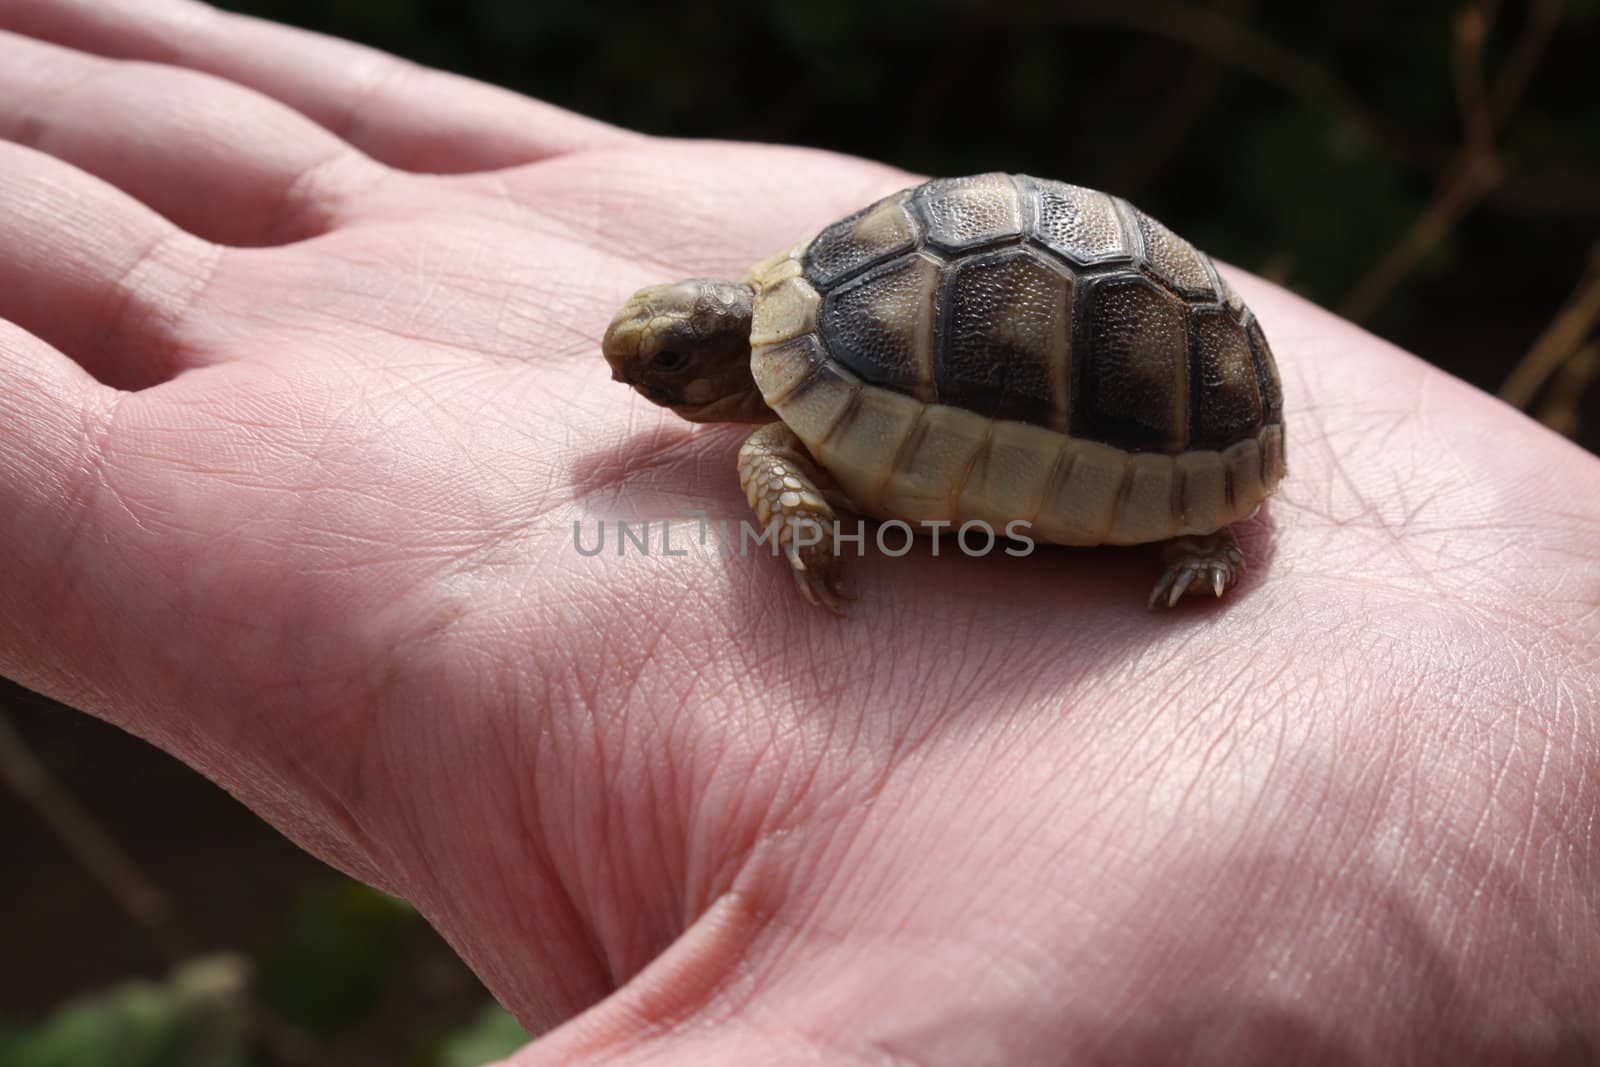 Baby tortoise walking on palm of a hand.